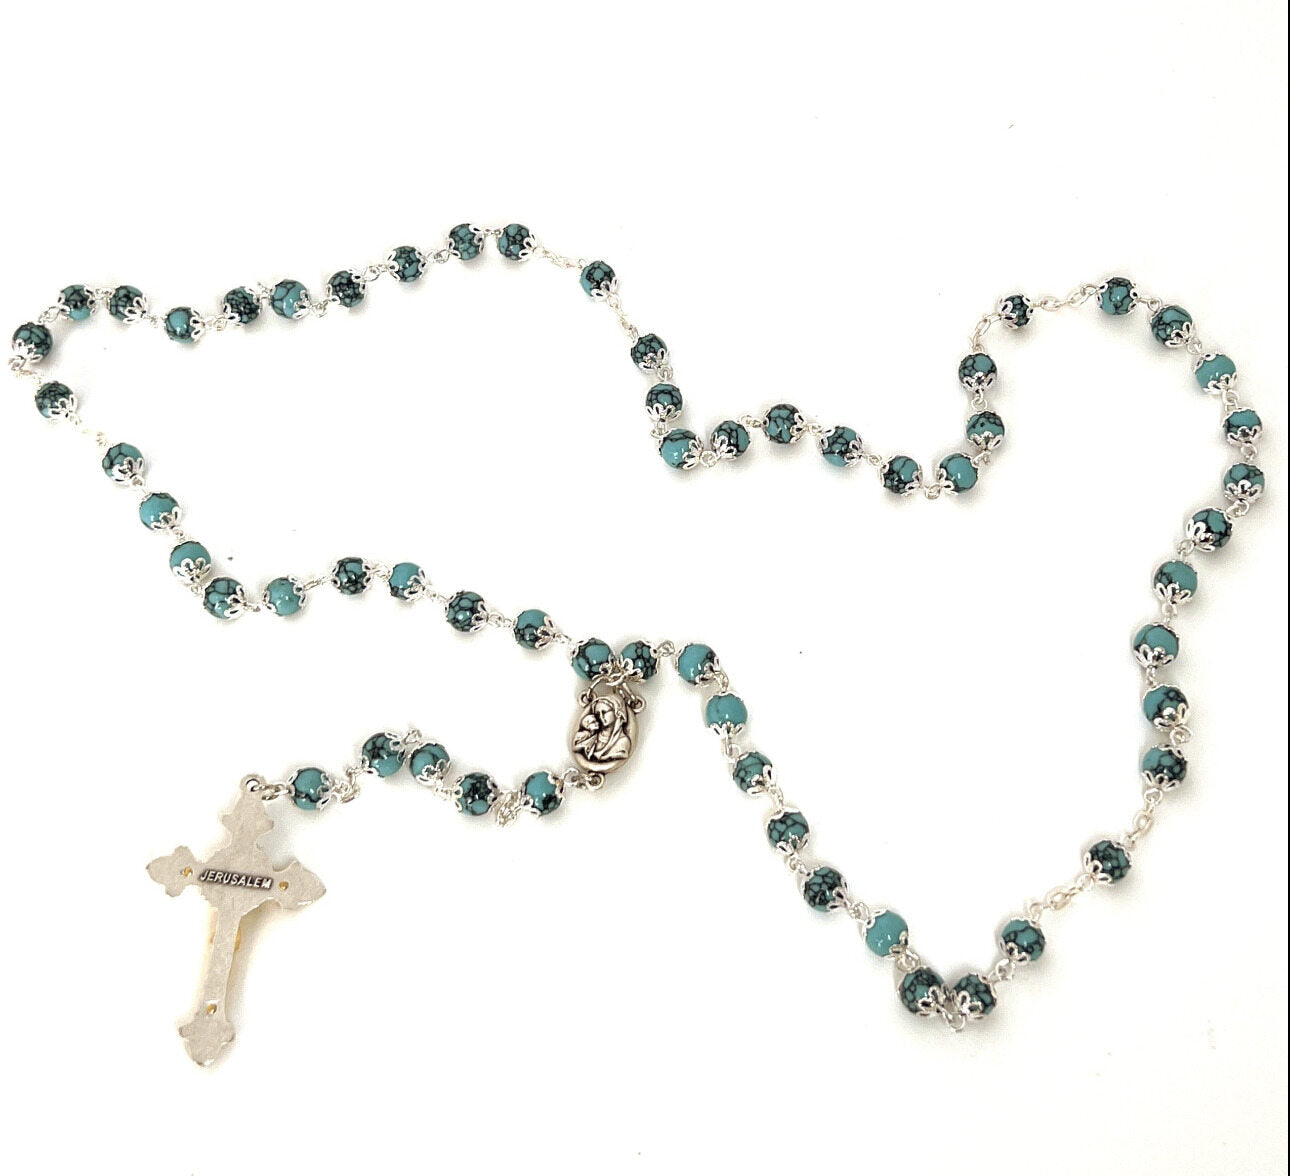  Farmhouse Clay Rosary Beads 44 Turquoise